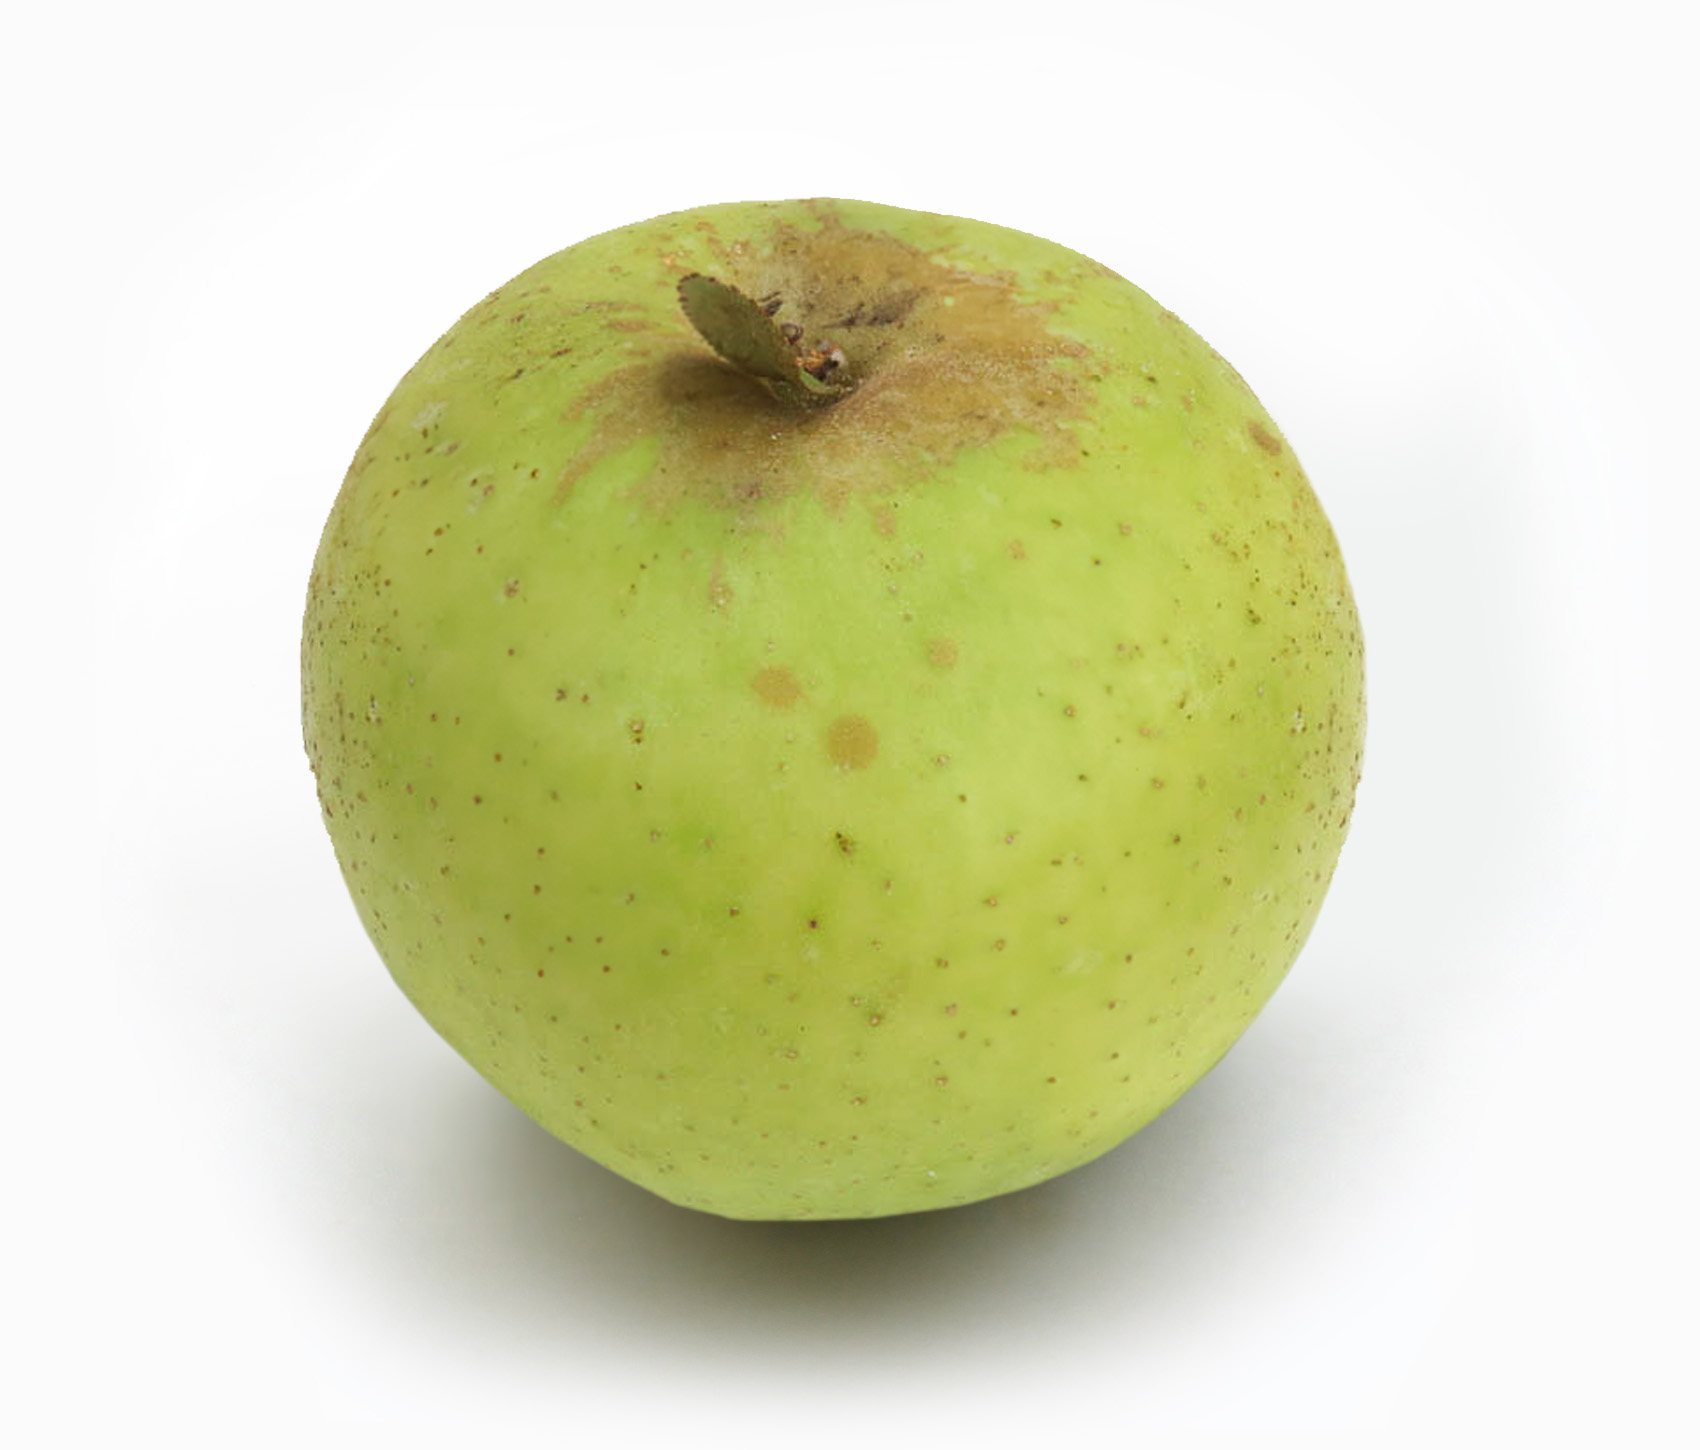 yellow apples and their uses -Orin apples 1.0